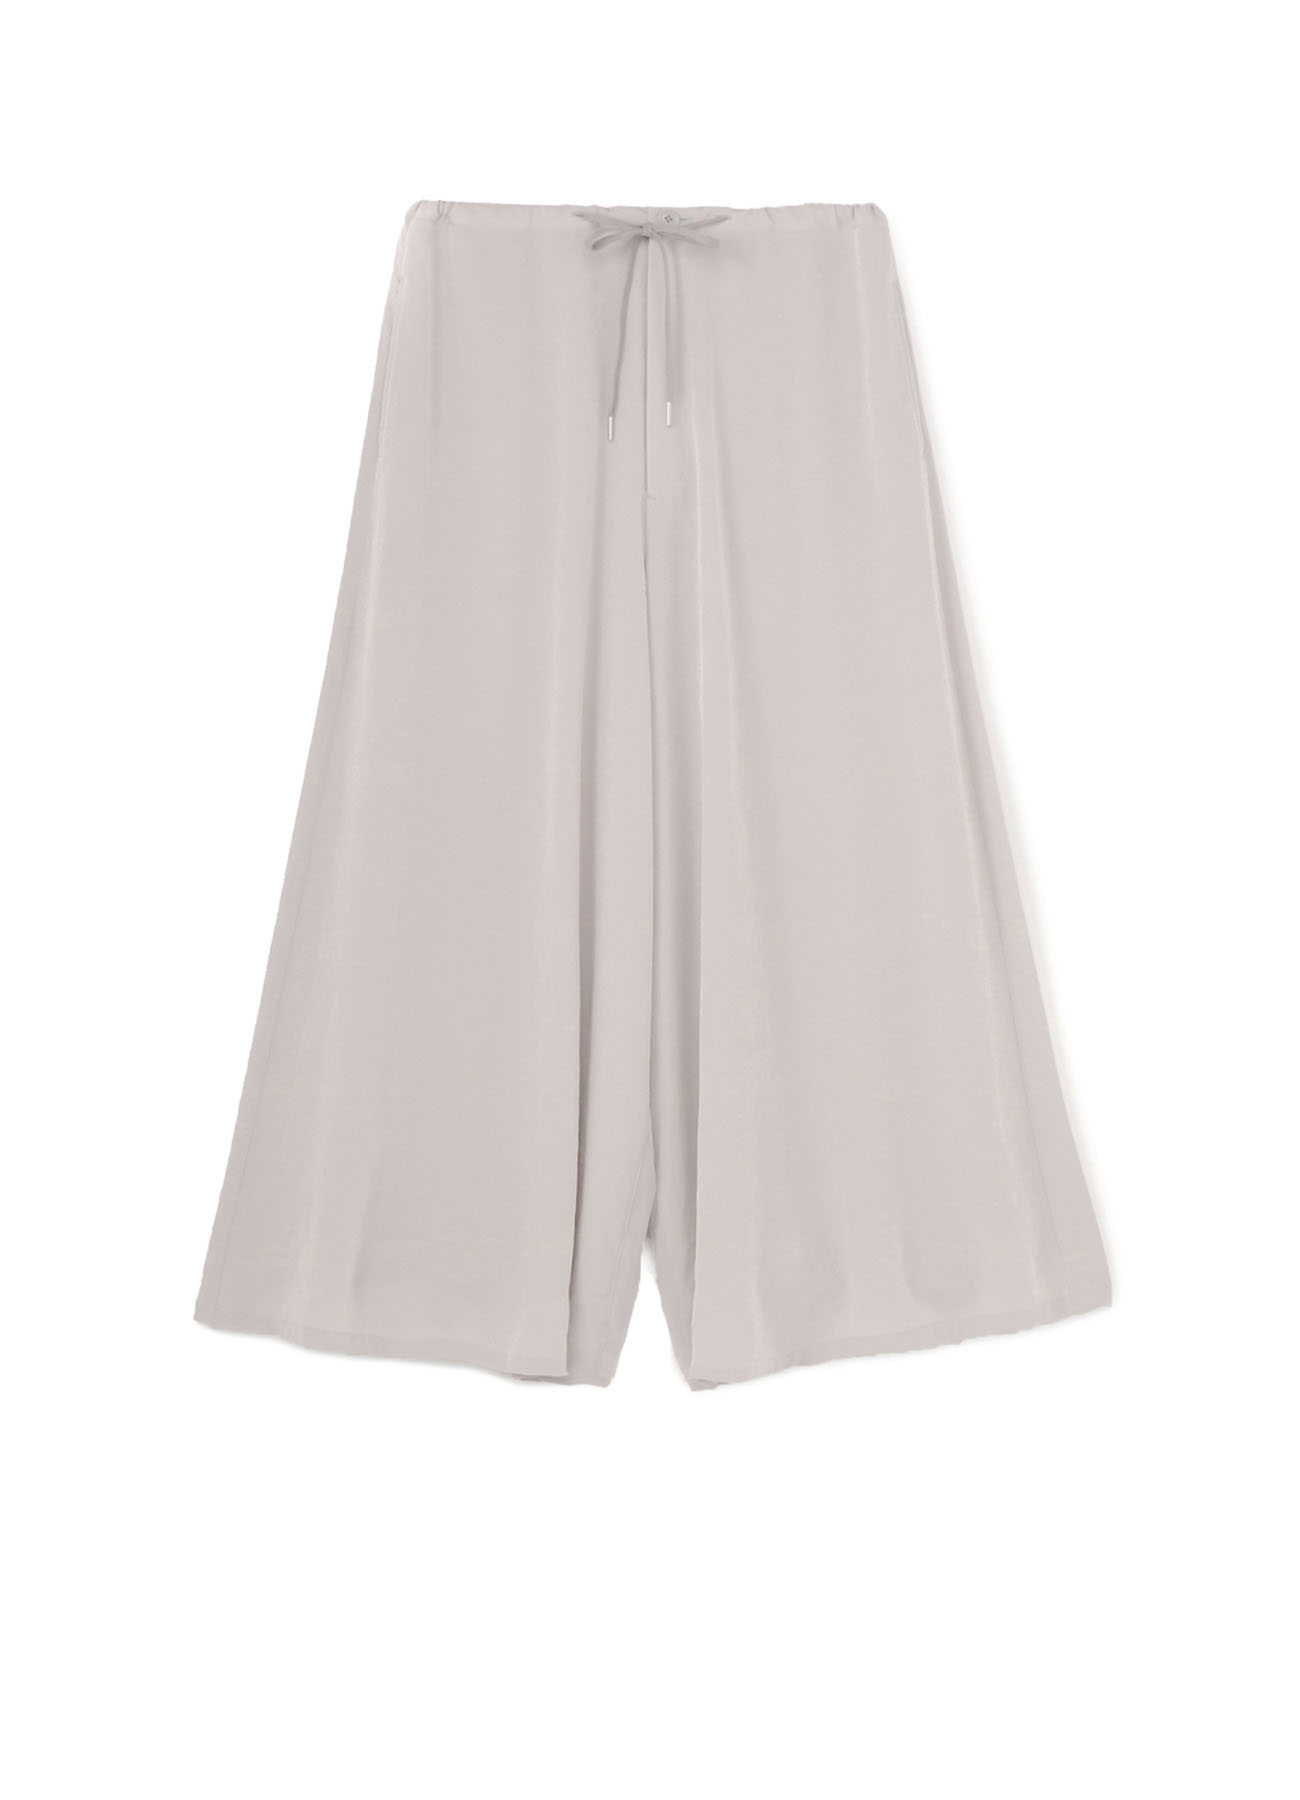 TRIACETATE POLYESTER de CHINE WIDE FLARE PANTS